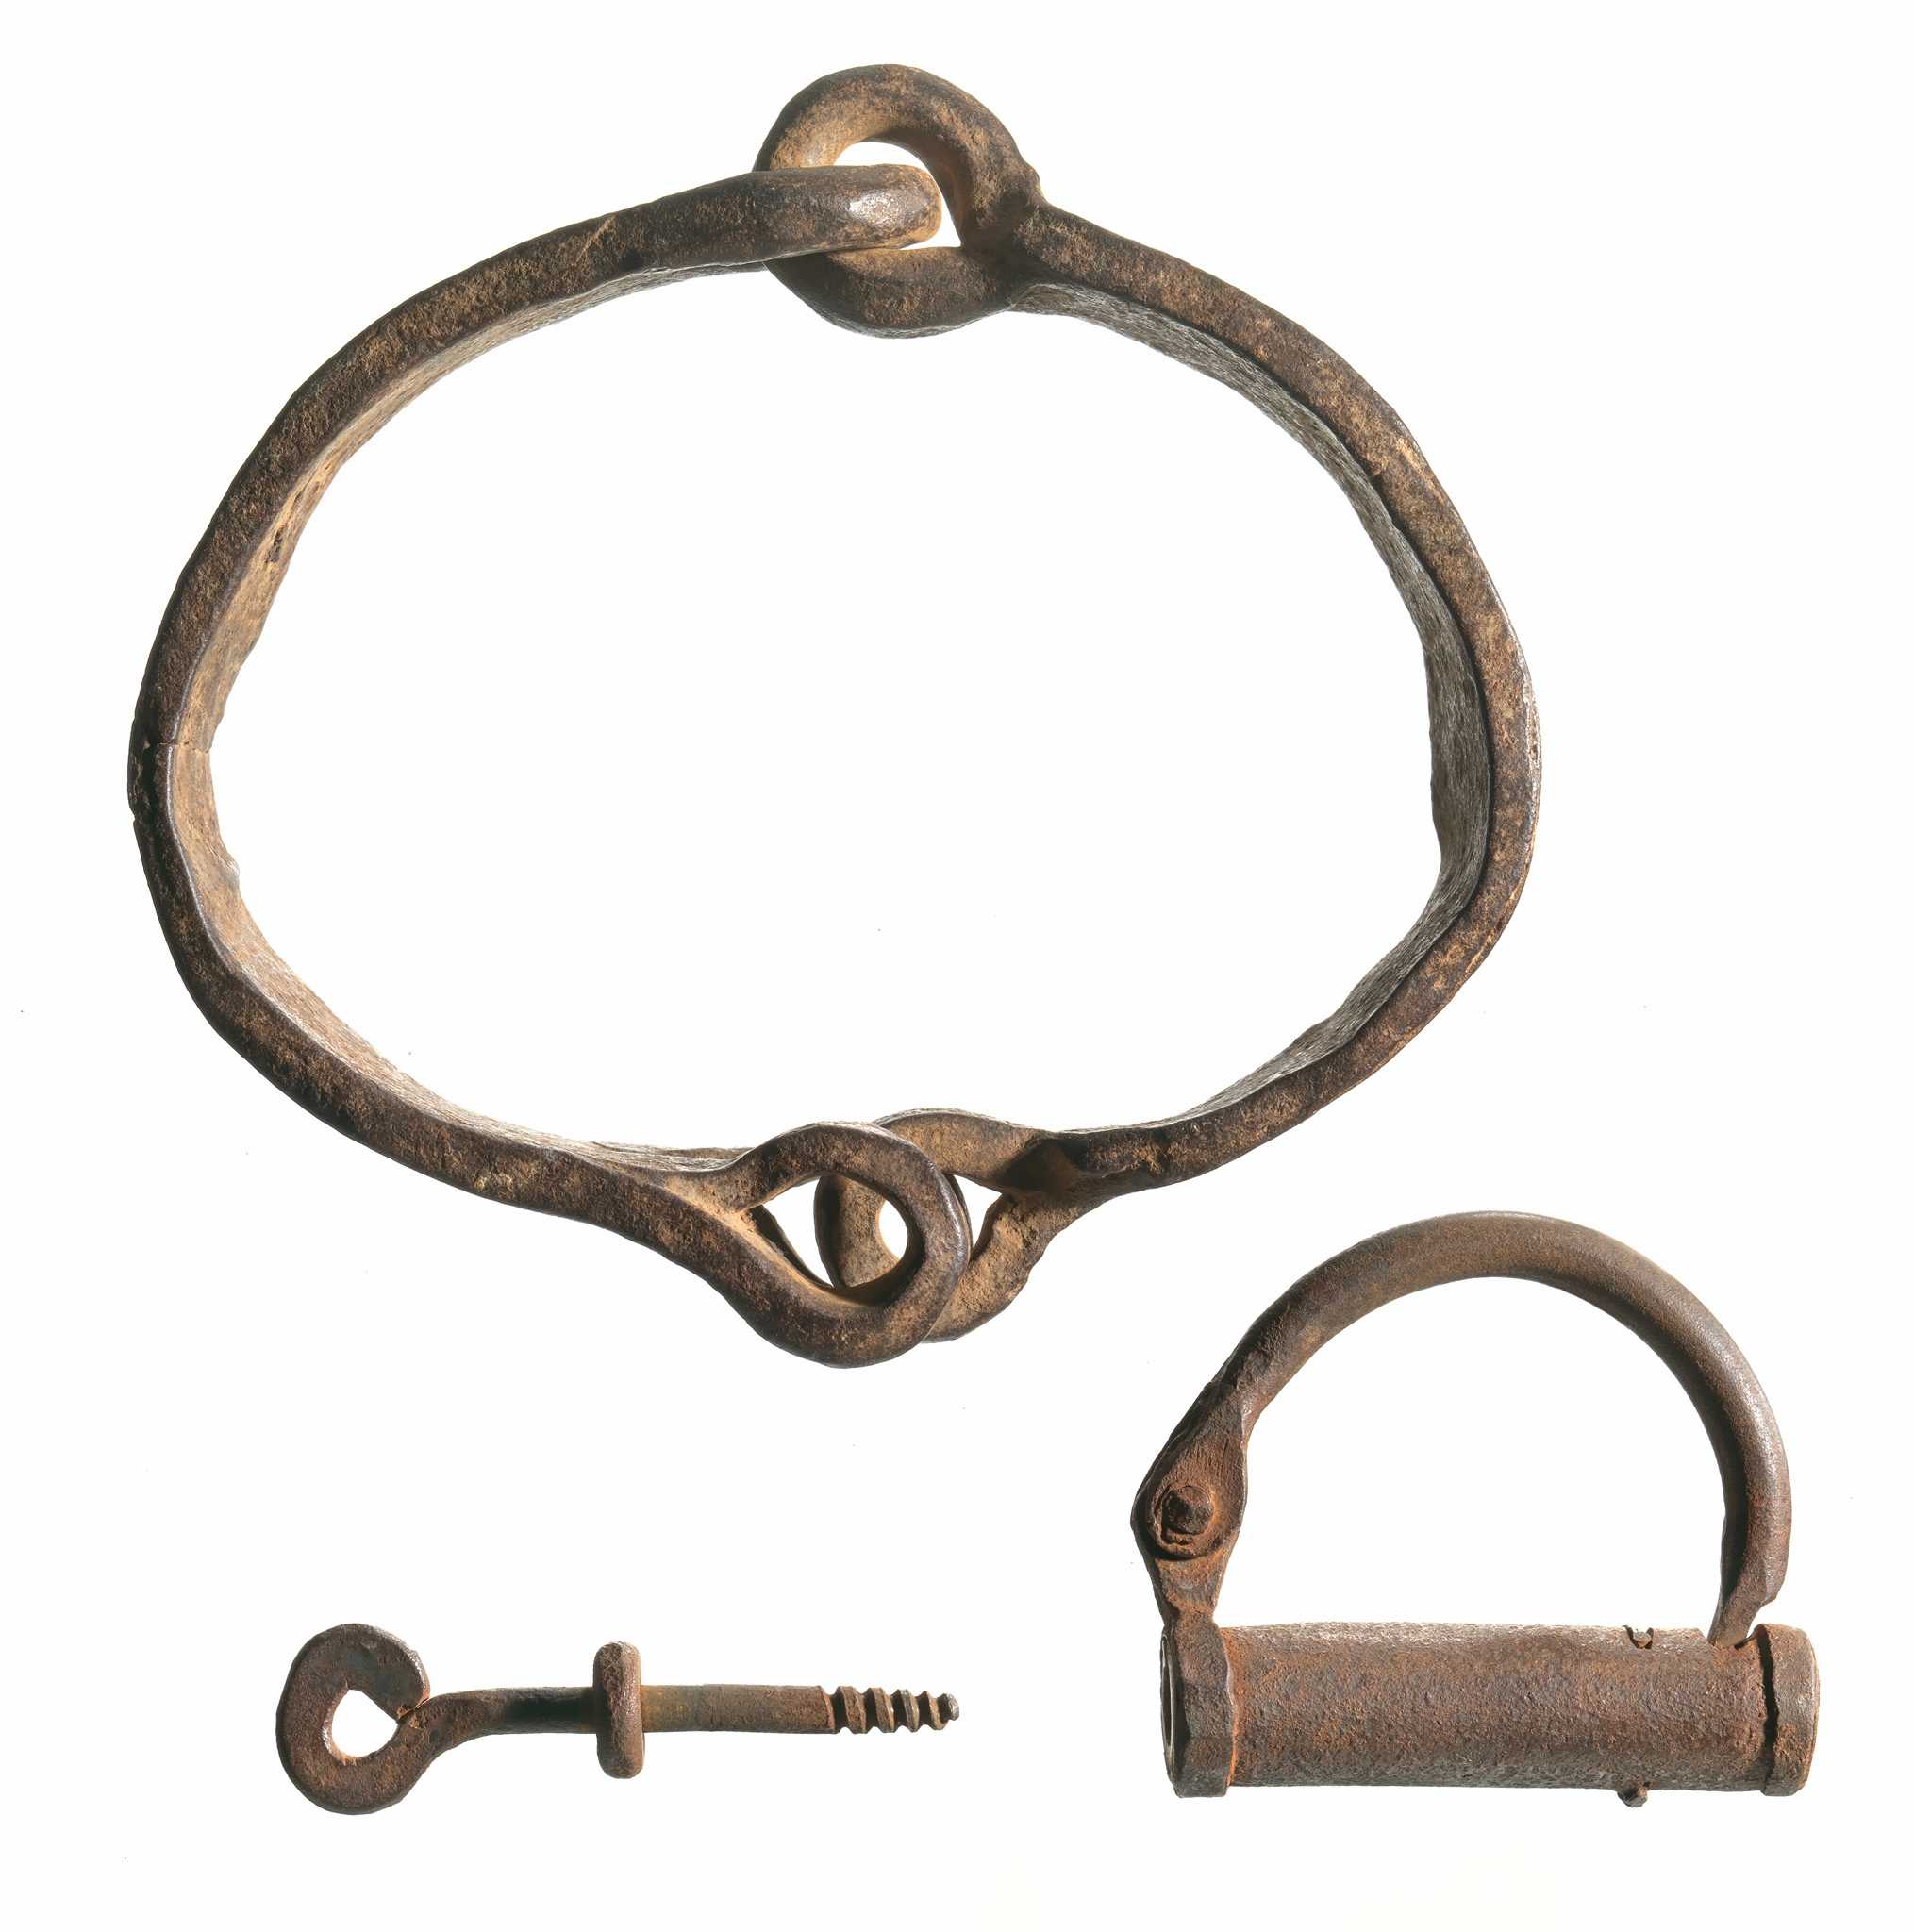 Wrought iron collar with a three inch locking device and a three inch key. The collar is made up of two pieces of iron attached with a hinged, chain link back. Each end of the collar has an eyelet that can overlap and the lock can be inserted in to. The lock has a cylinder locking mechanism and a curved shackle hinged on one side. The key has an eyelet on one end and a shoulder in the middle of the shaft. The teeth of the key are threaded like a screw.